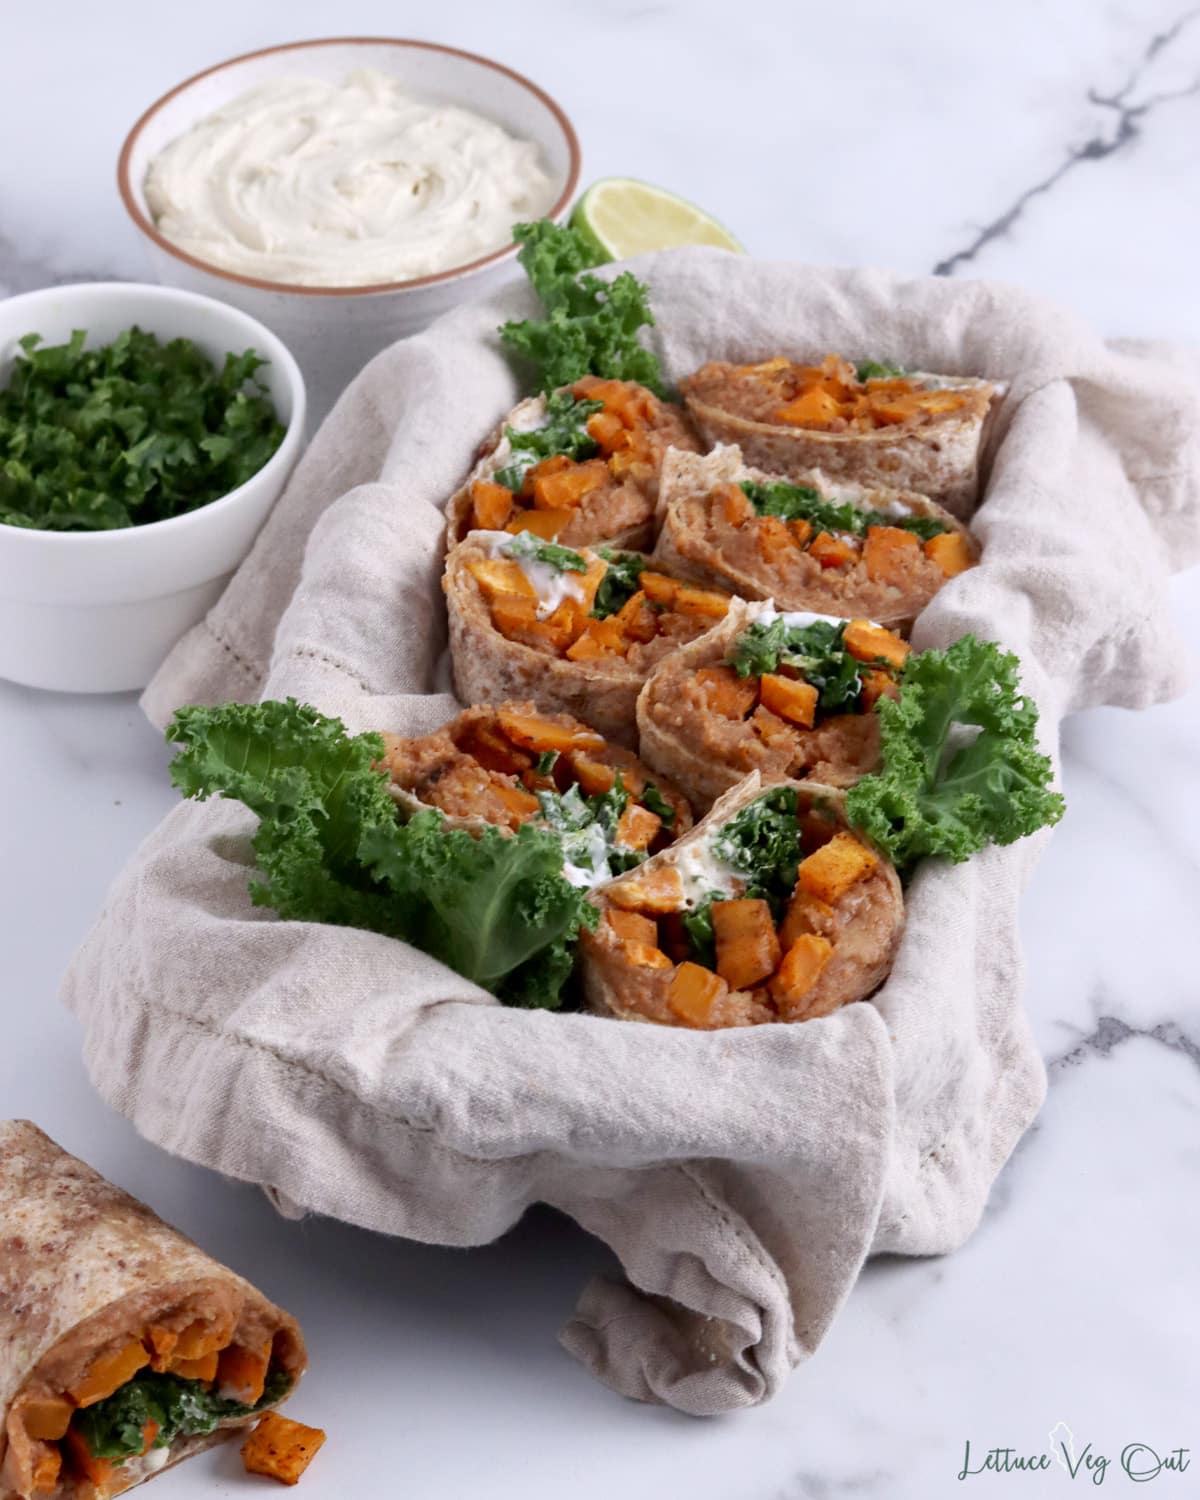 Burritos filled with sweet potato, refried beans and kale cut in half in a bowl.